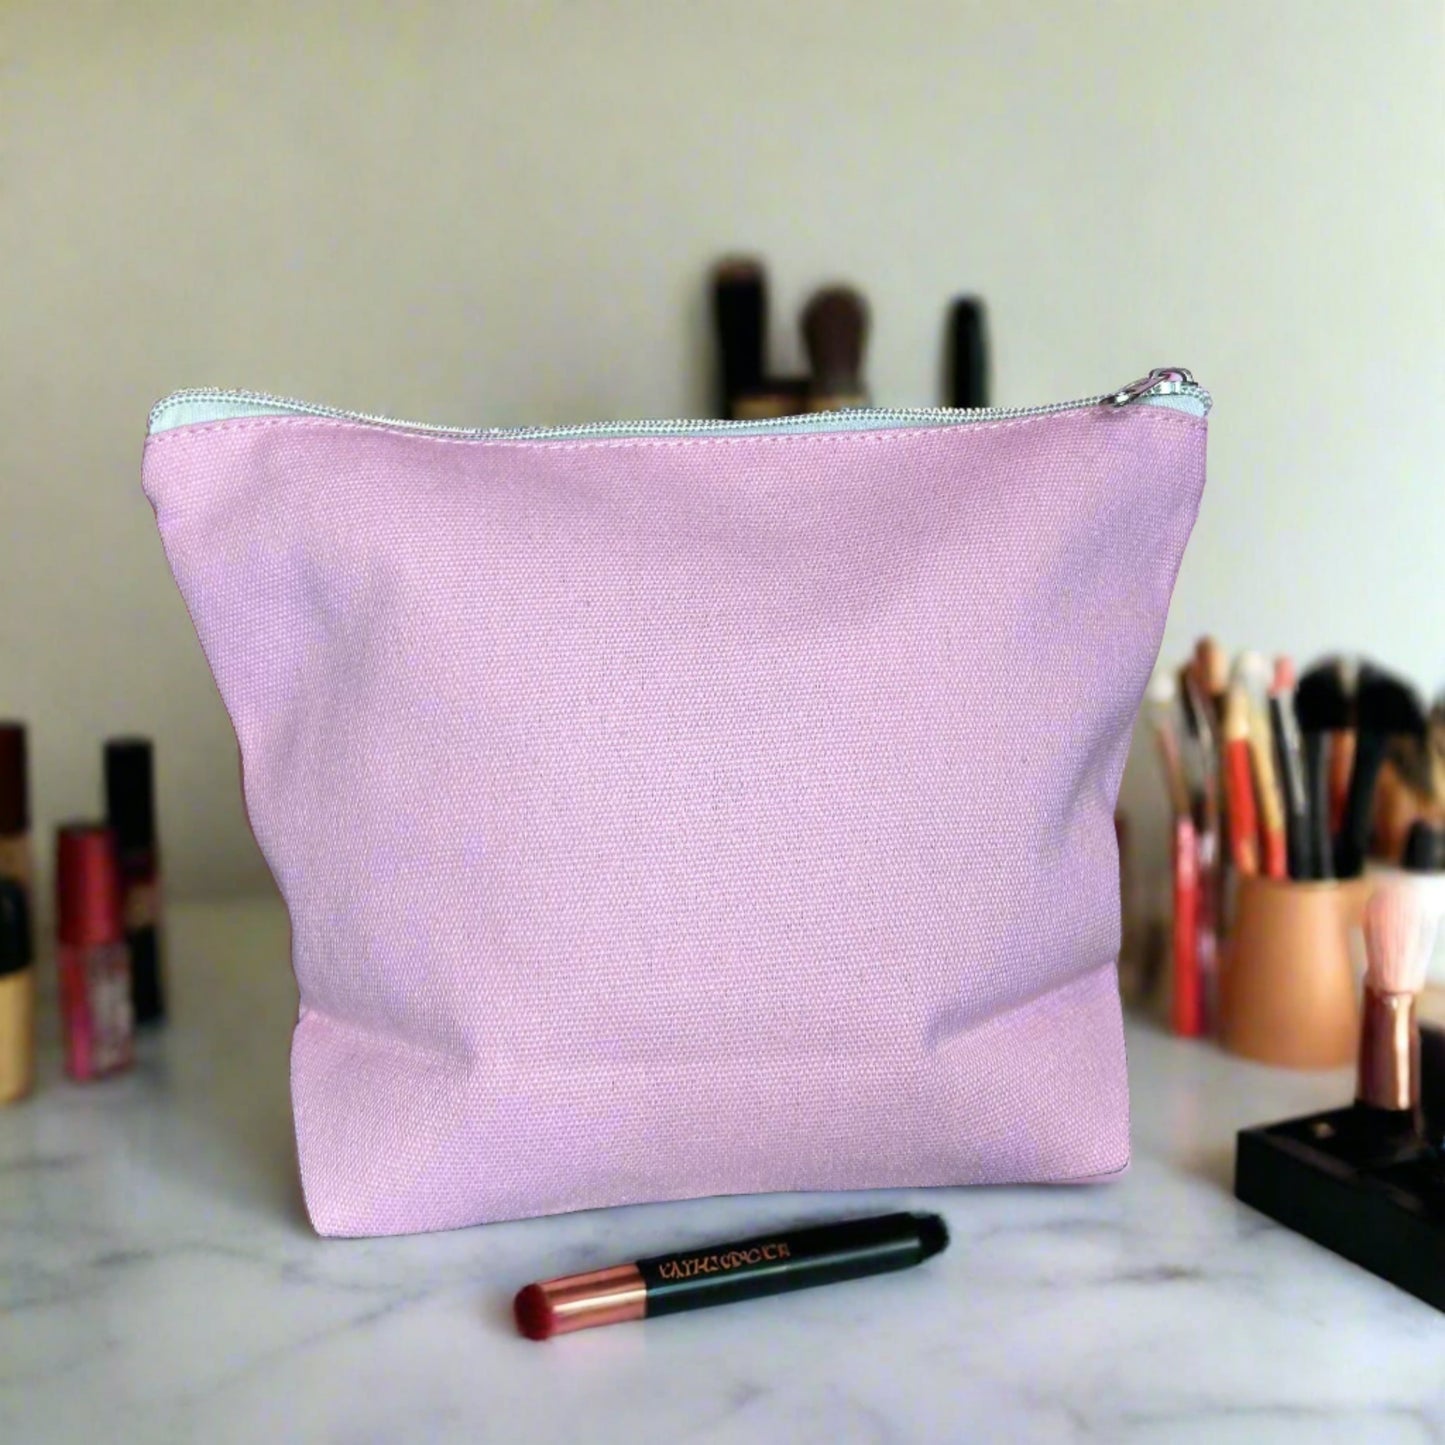 RICH BITCH ENERGY ONLY MAKEUP BAG